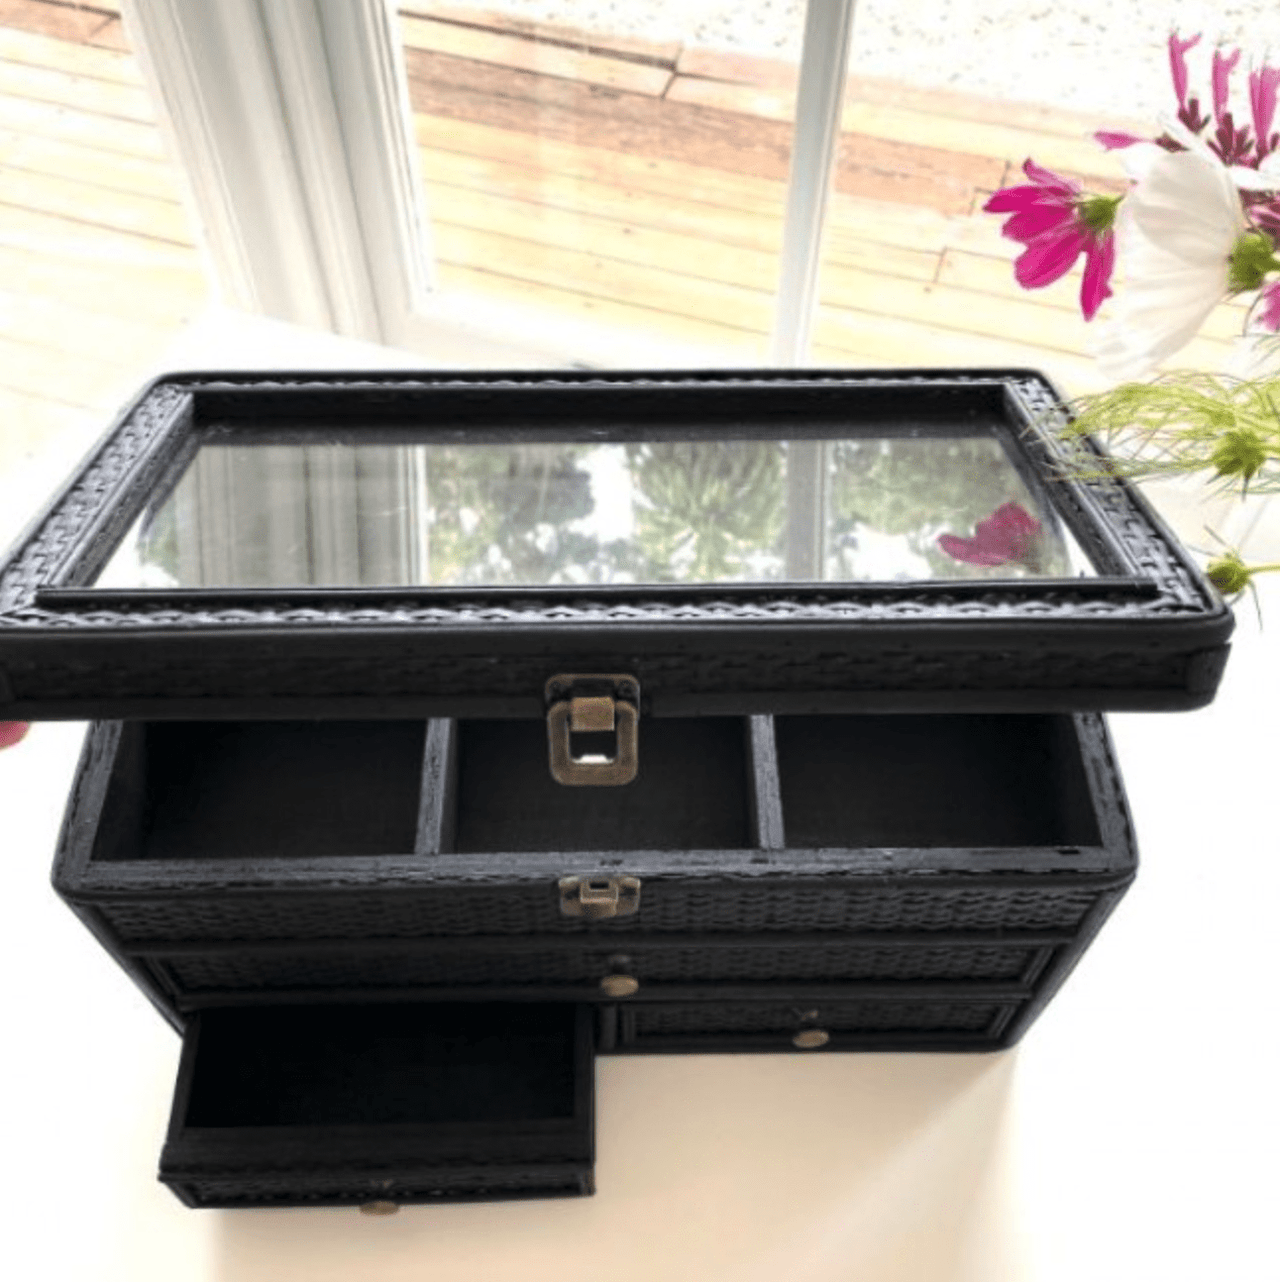 Weave Jewellery Box - Black House of Dudley